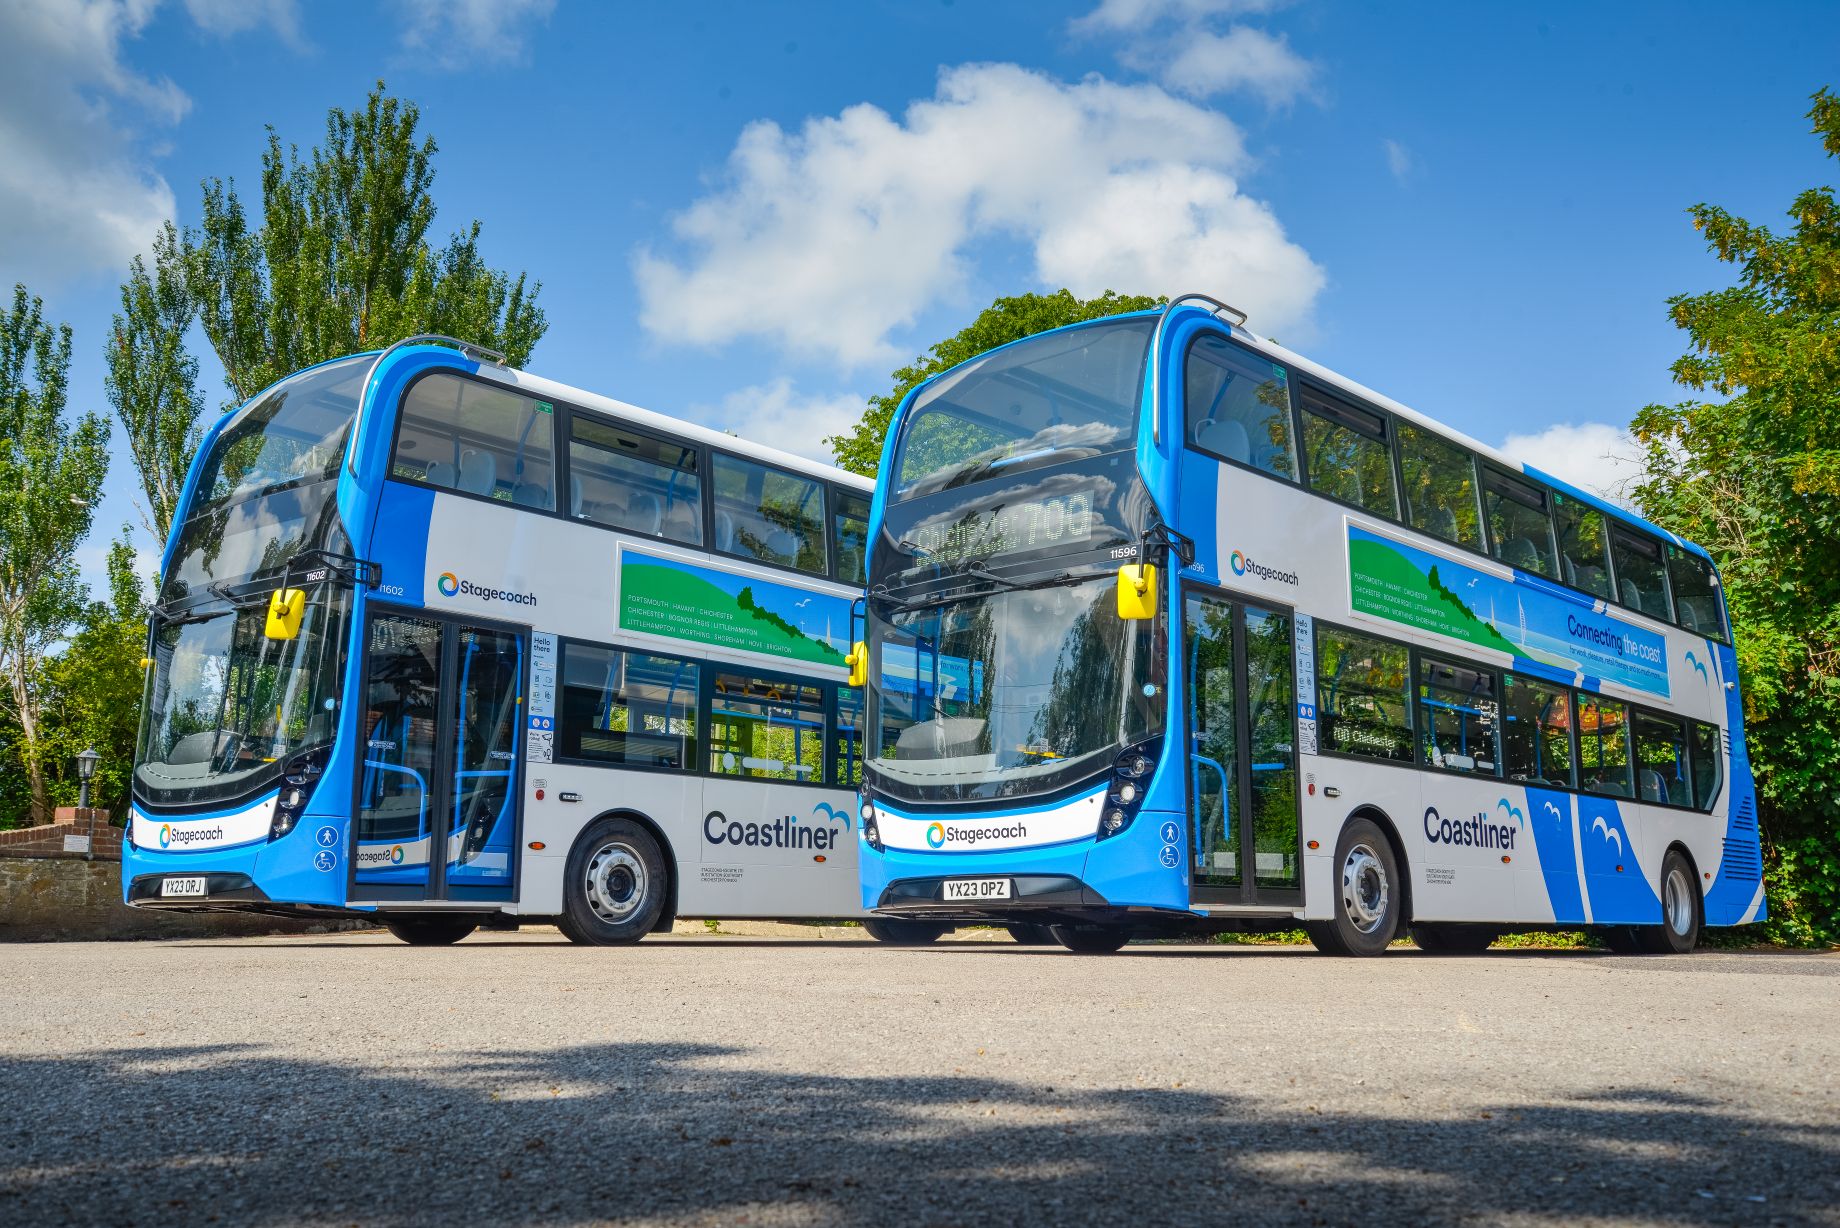 Stagecoach rolling out 22 Enviro400s on Coastliner